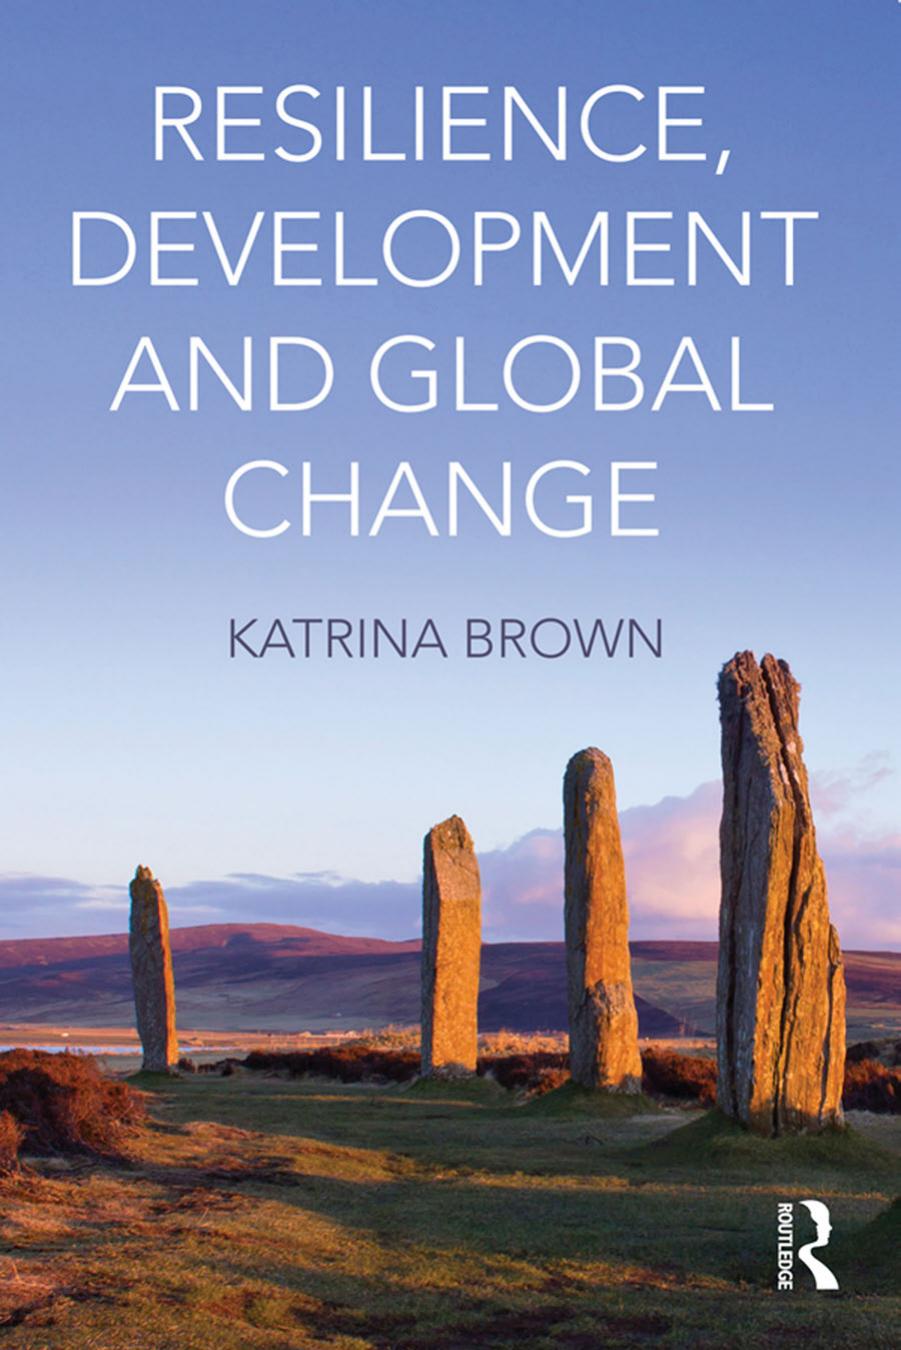 Resilience, Development and Global Change, 2016